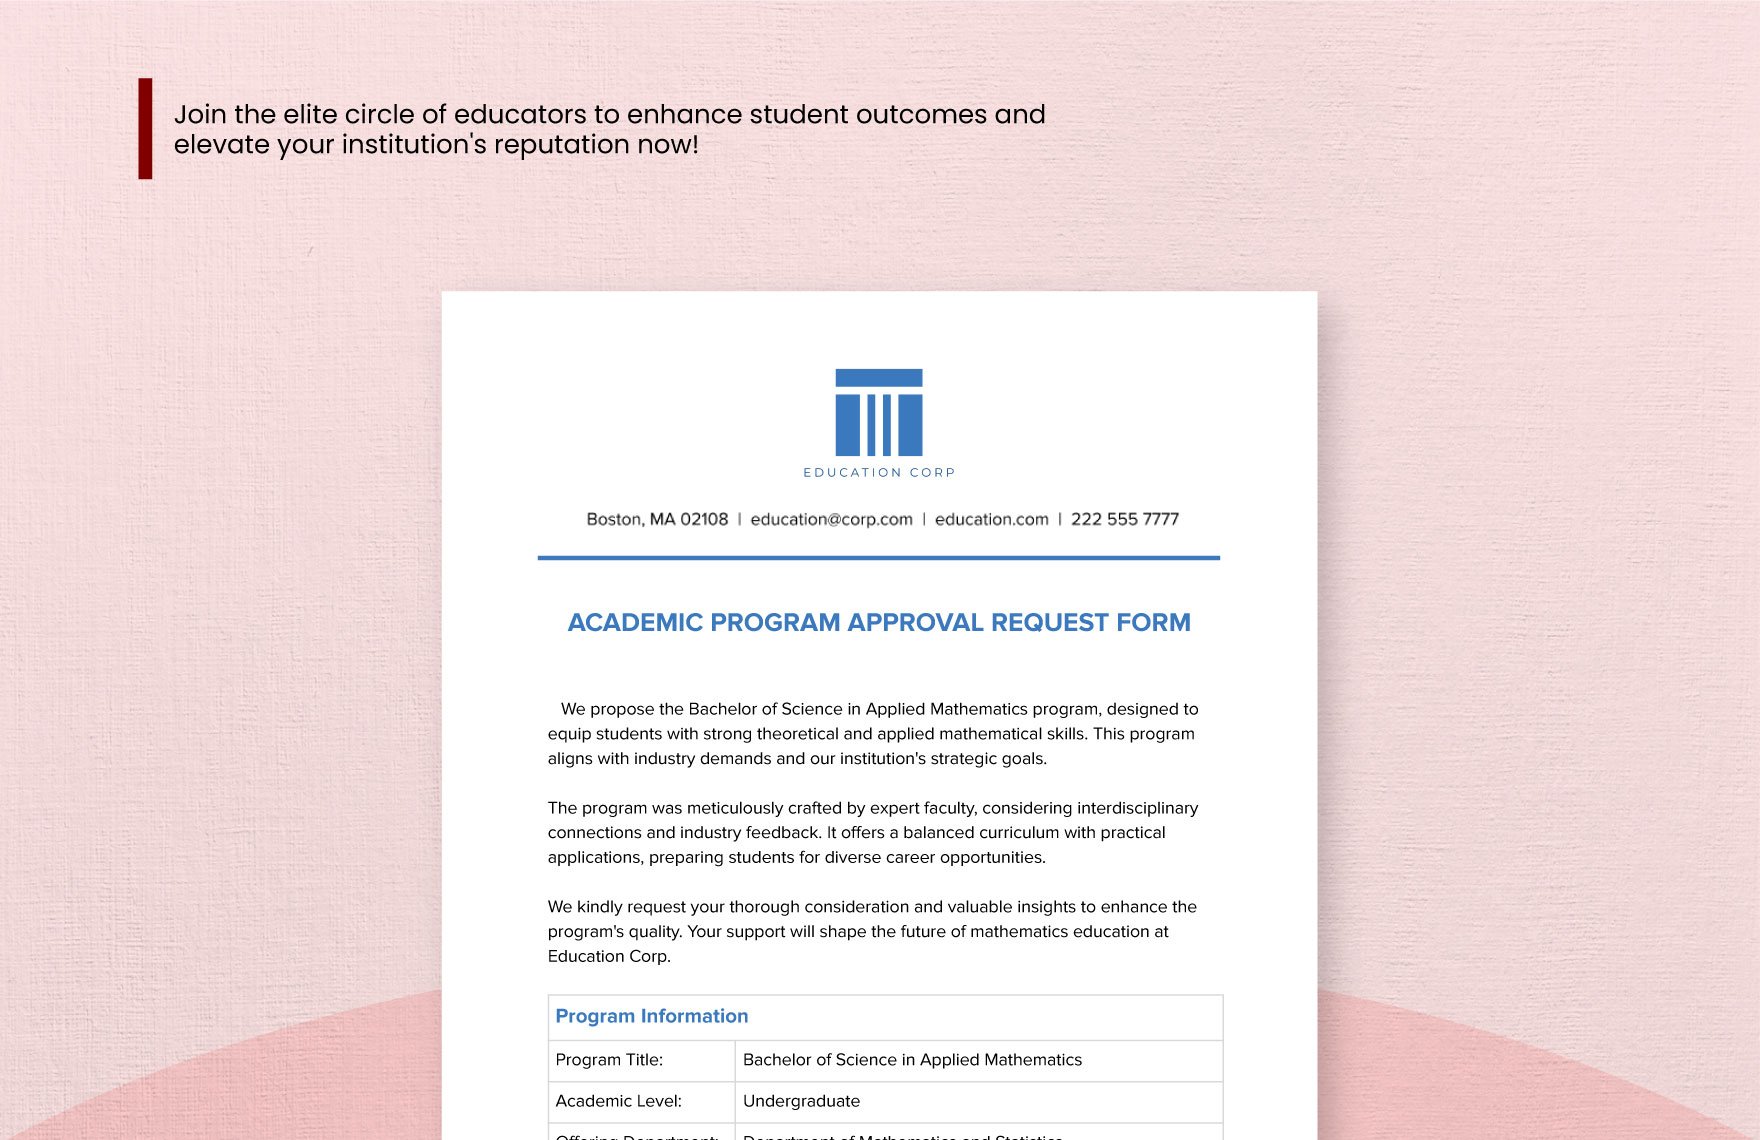 Academic Program Approval Request Form Template